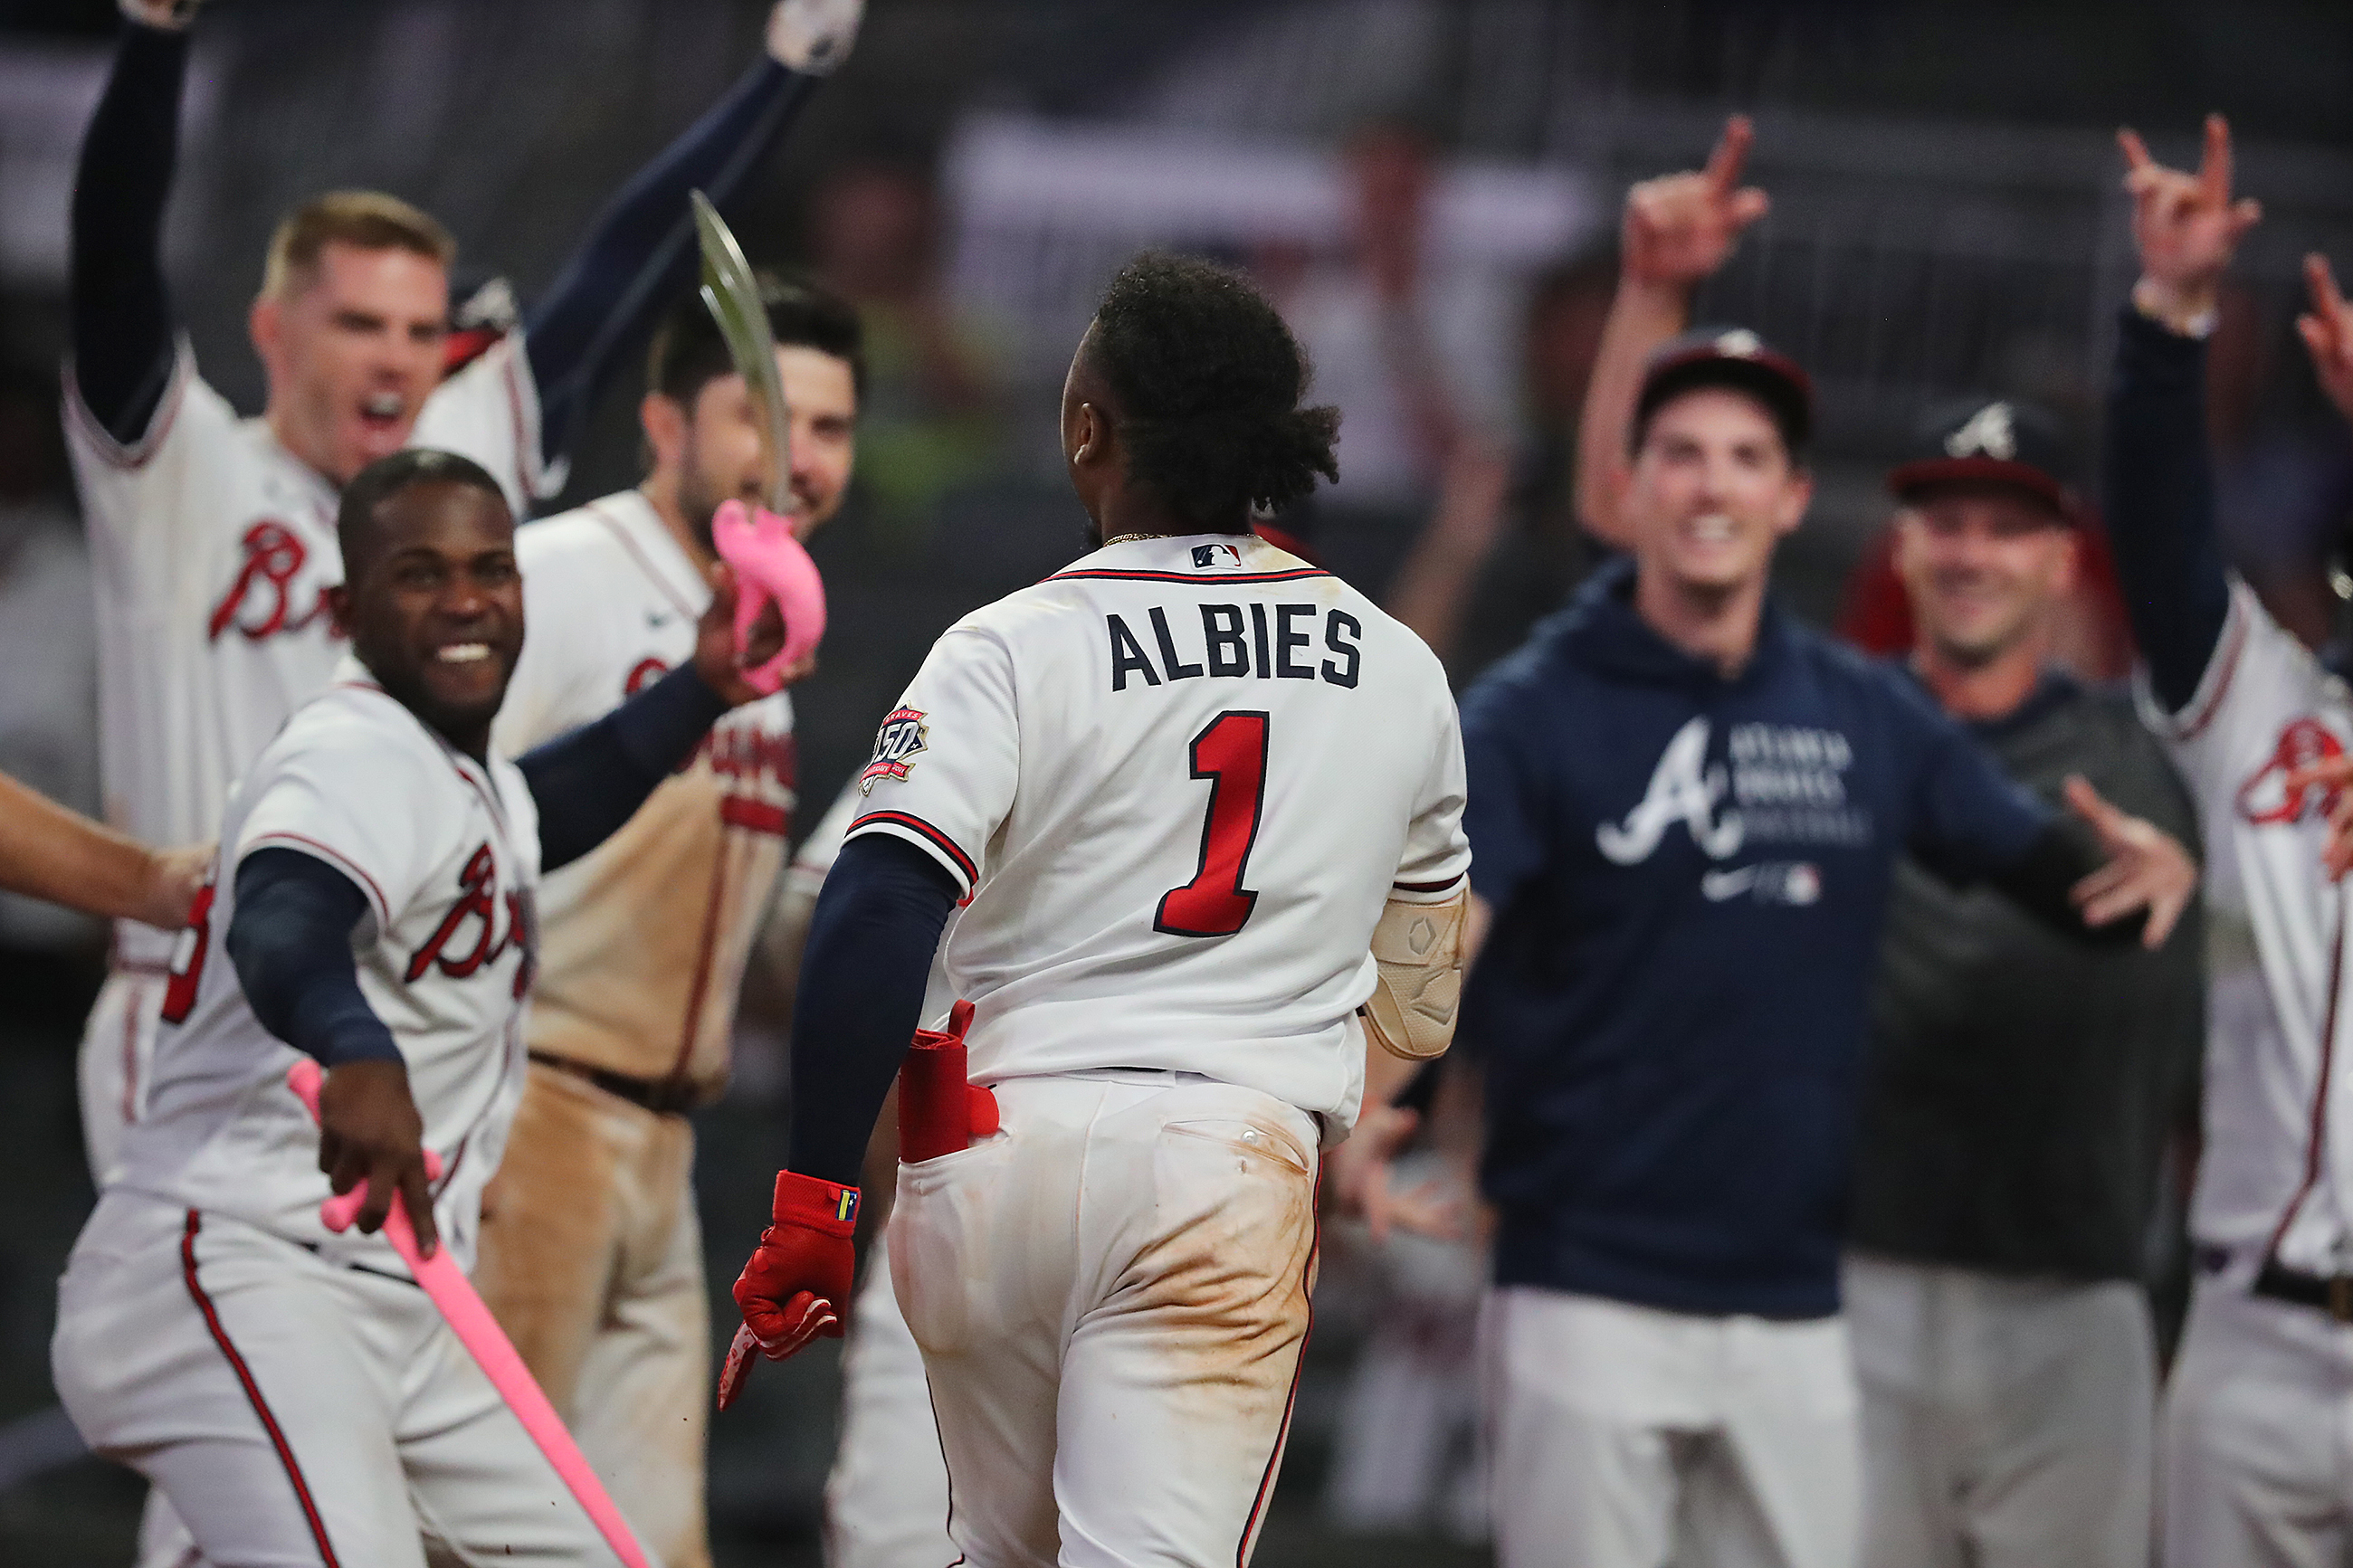 Albies' 3-run homer in the 8th gives the Braves a 4-2 victory over